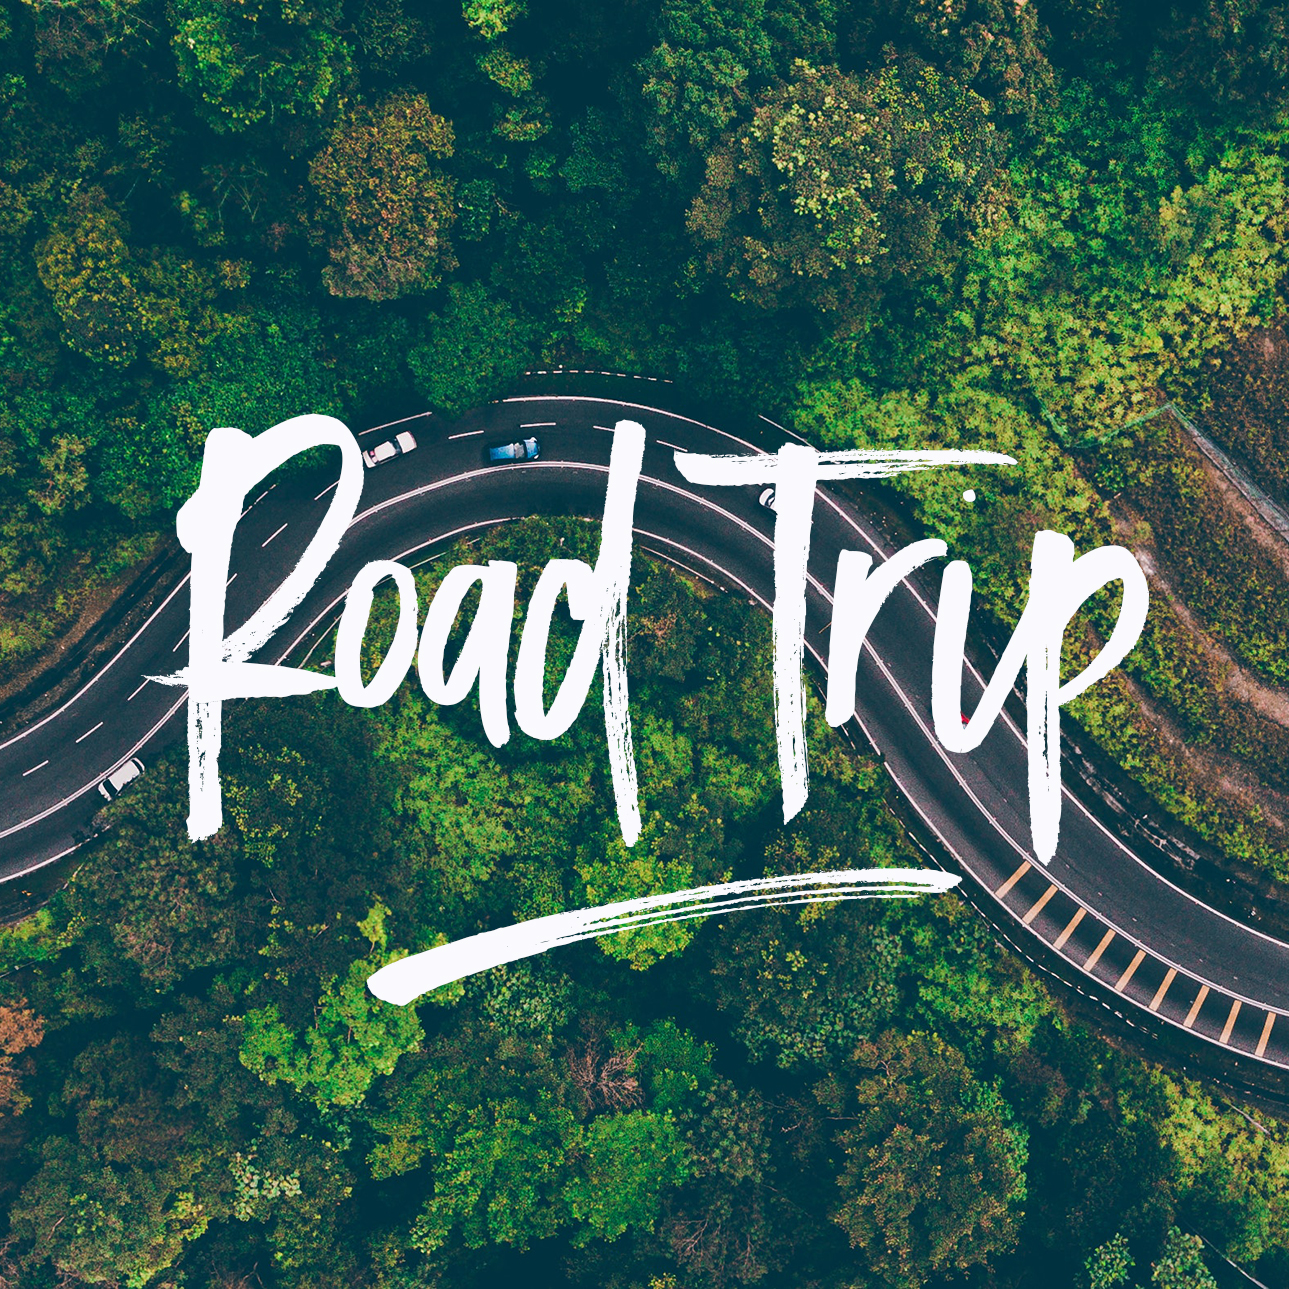 Phrase 'Road Trip' in white lettering over photo of curved road through green trees